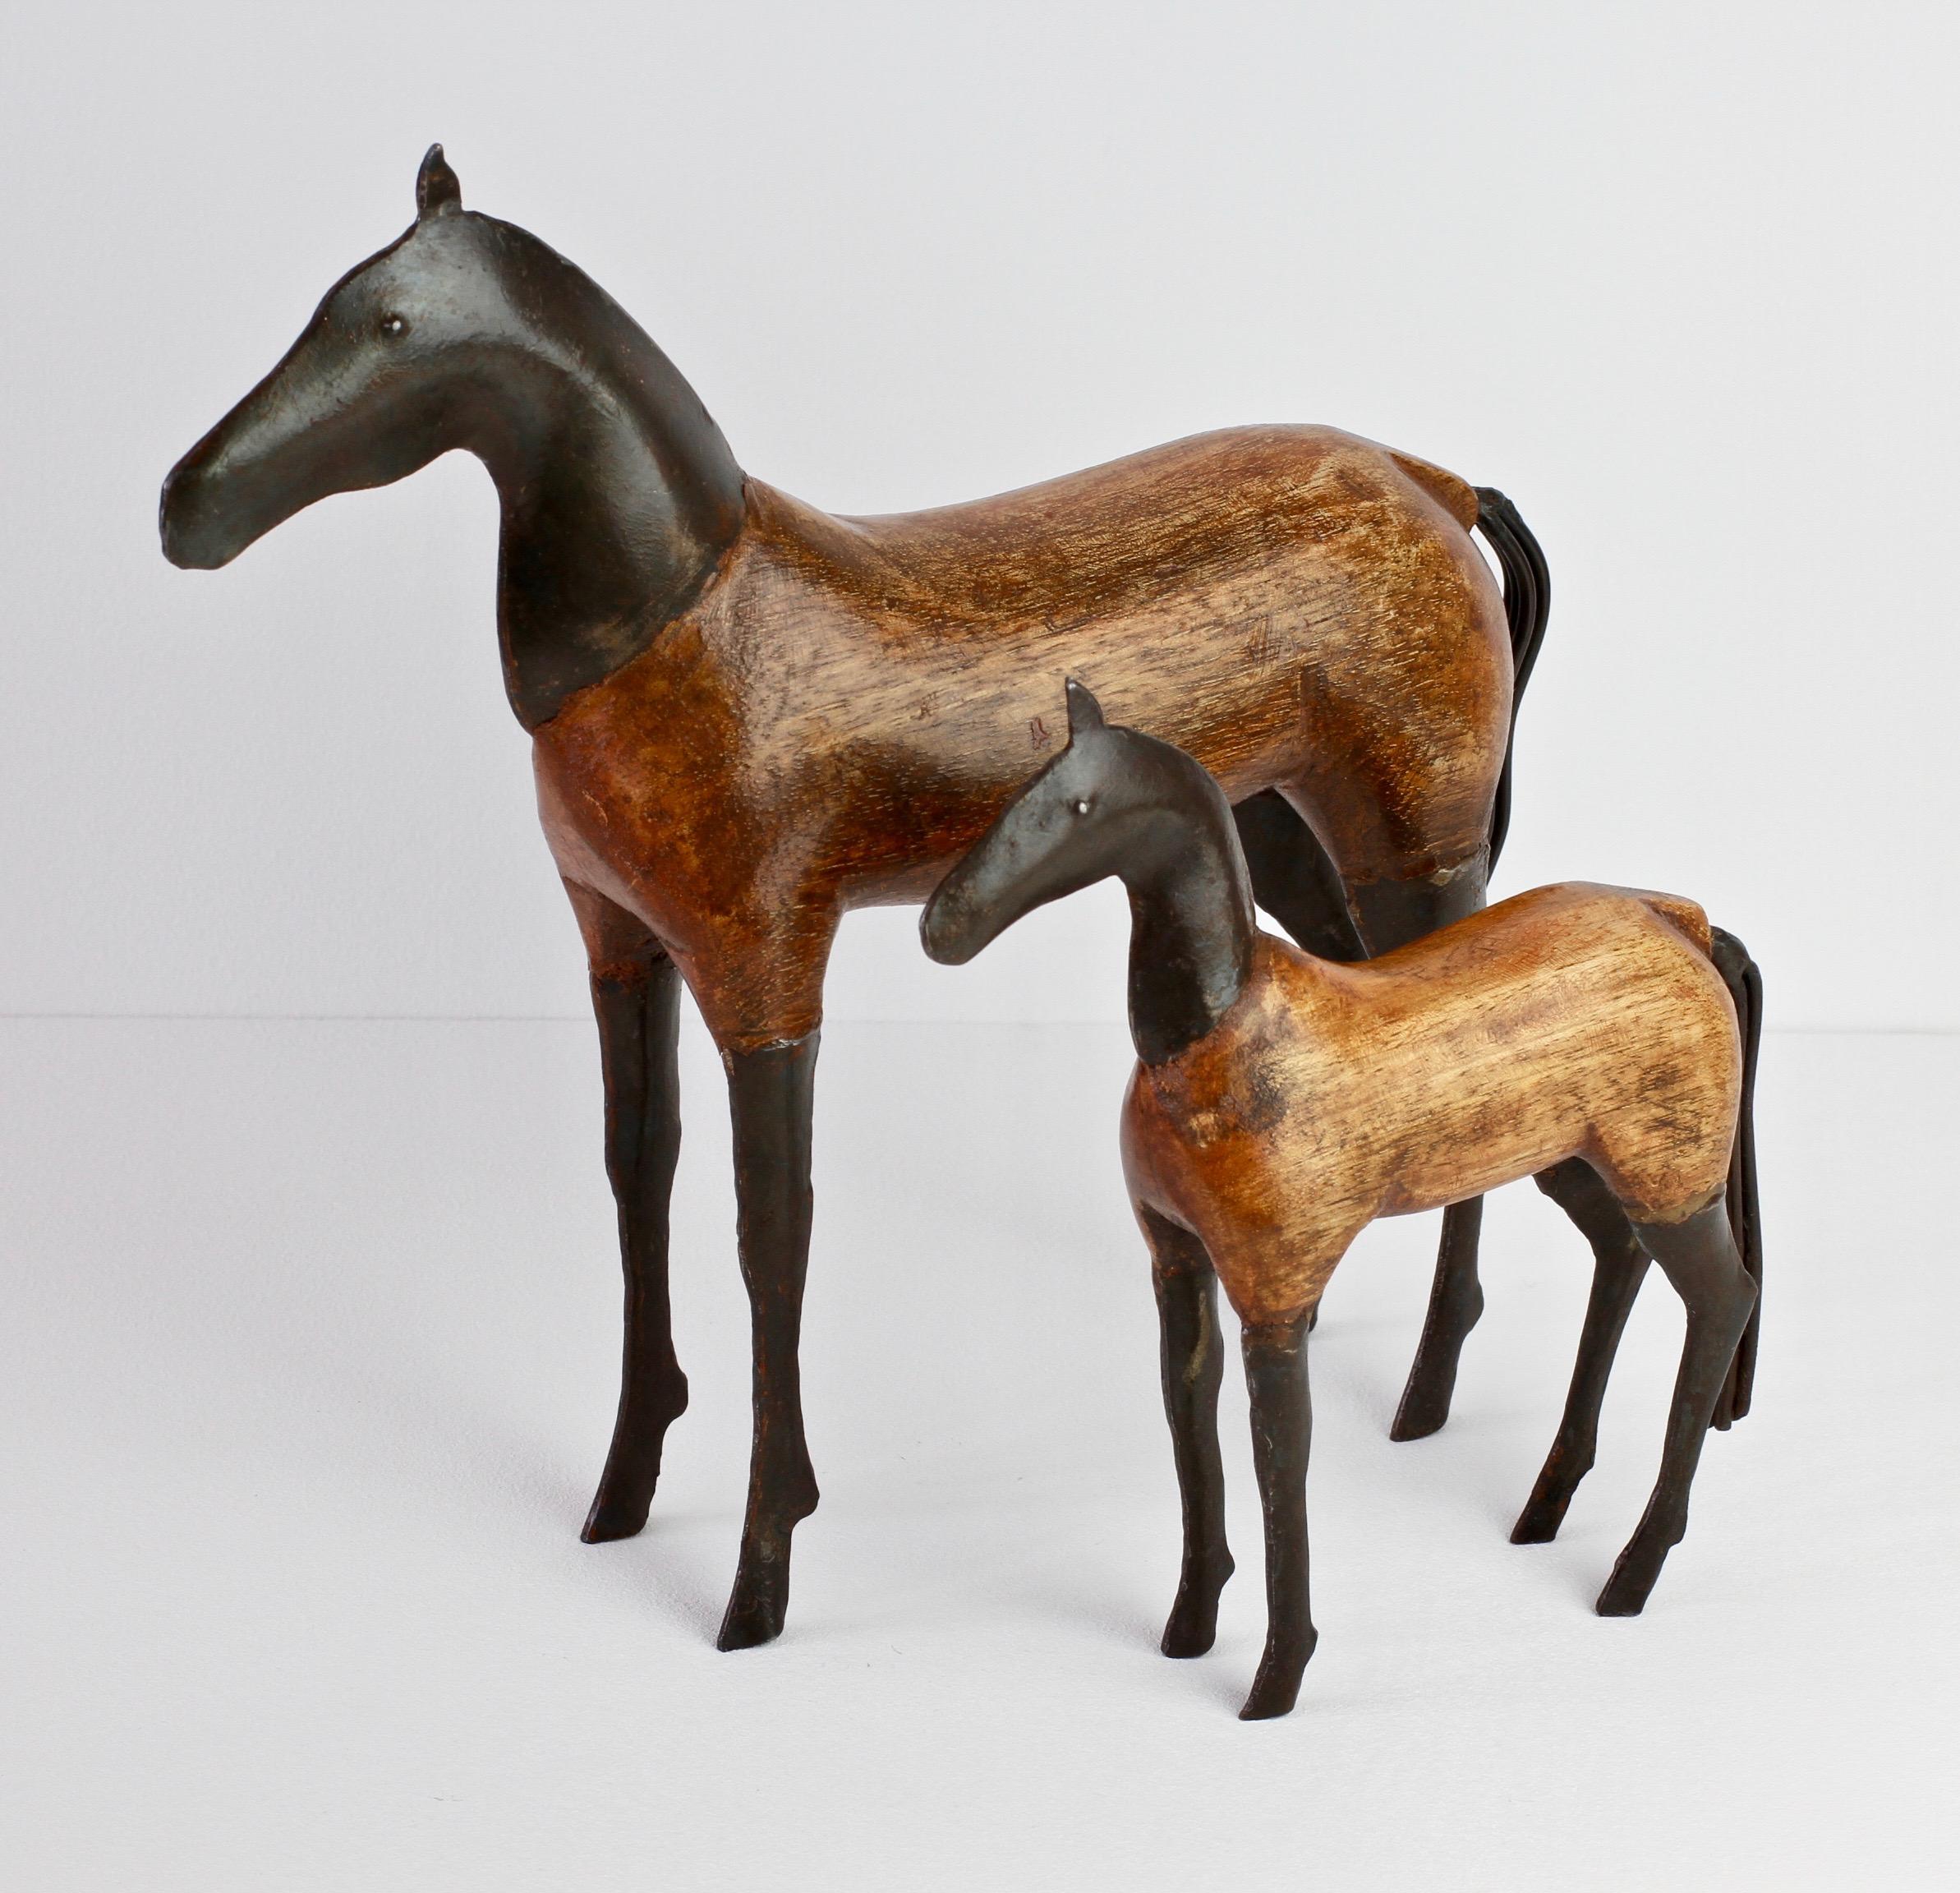 Wooden horse sculptures - probably Scandinavian in origin and made circa 1980s. Featuring bodies, beautifully shaped and hand-carved with legs, heads and tails all made of forged blackened metal. Perfect for any horse enthusiasts or lovers of the